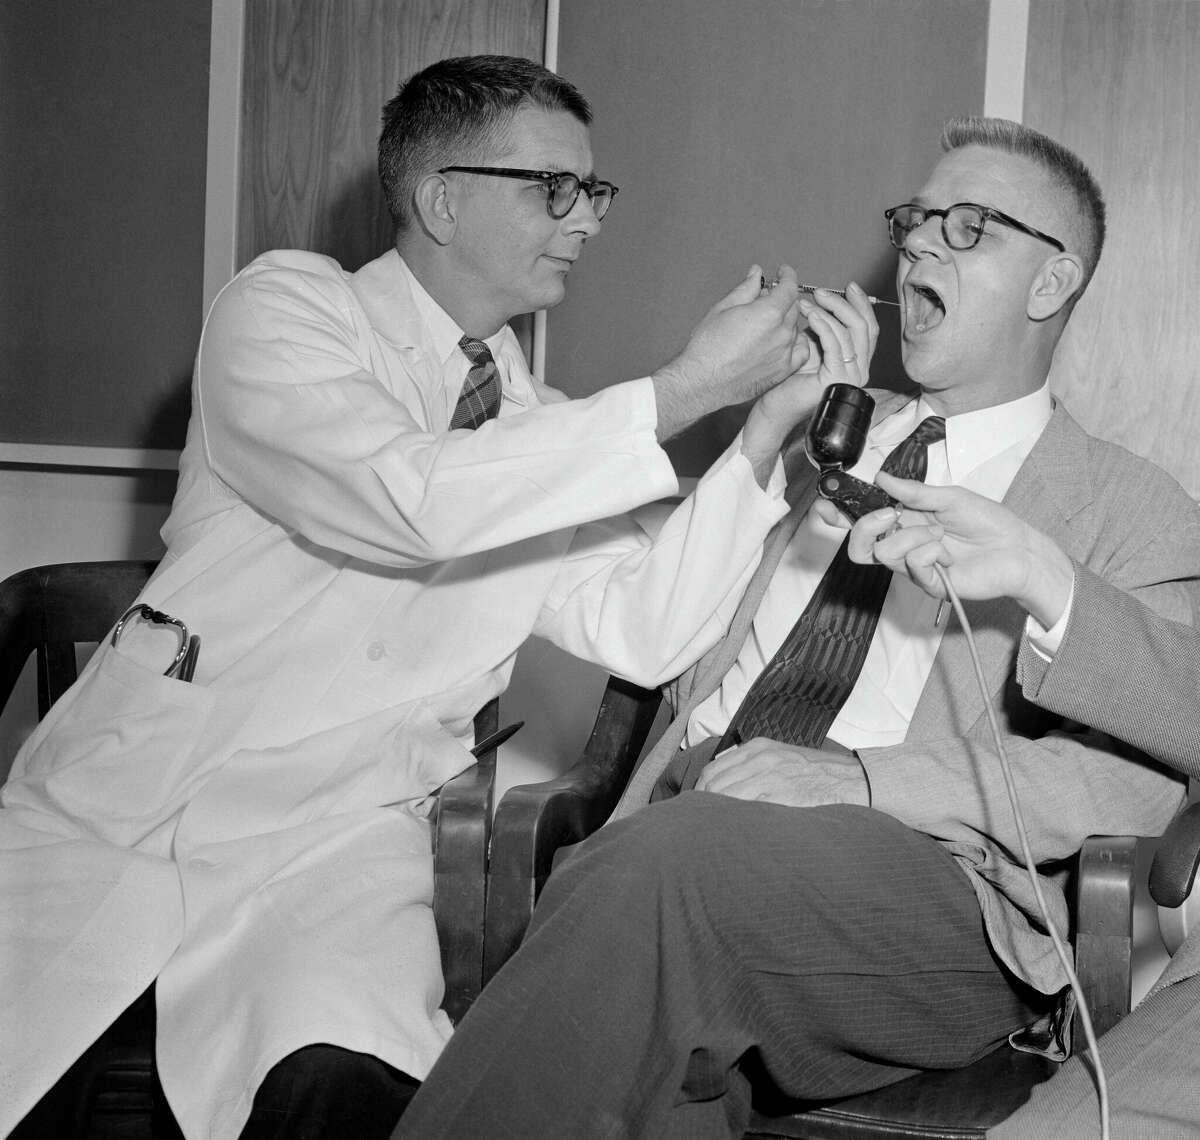 FILE: Dr. Harry L. Williams (left) administers LSD to Dr. Carl Pfeiffer, chairman of Emory University's pharmacological department, in 1955 during early research into the drug.